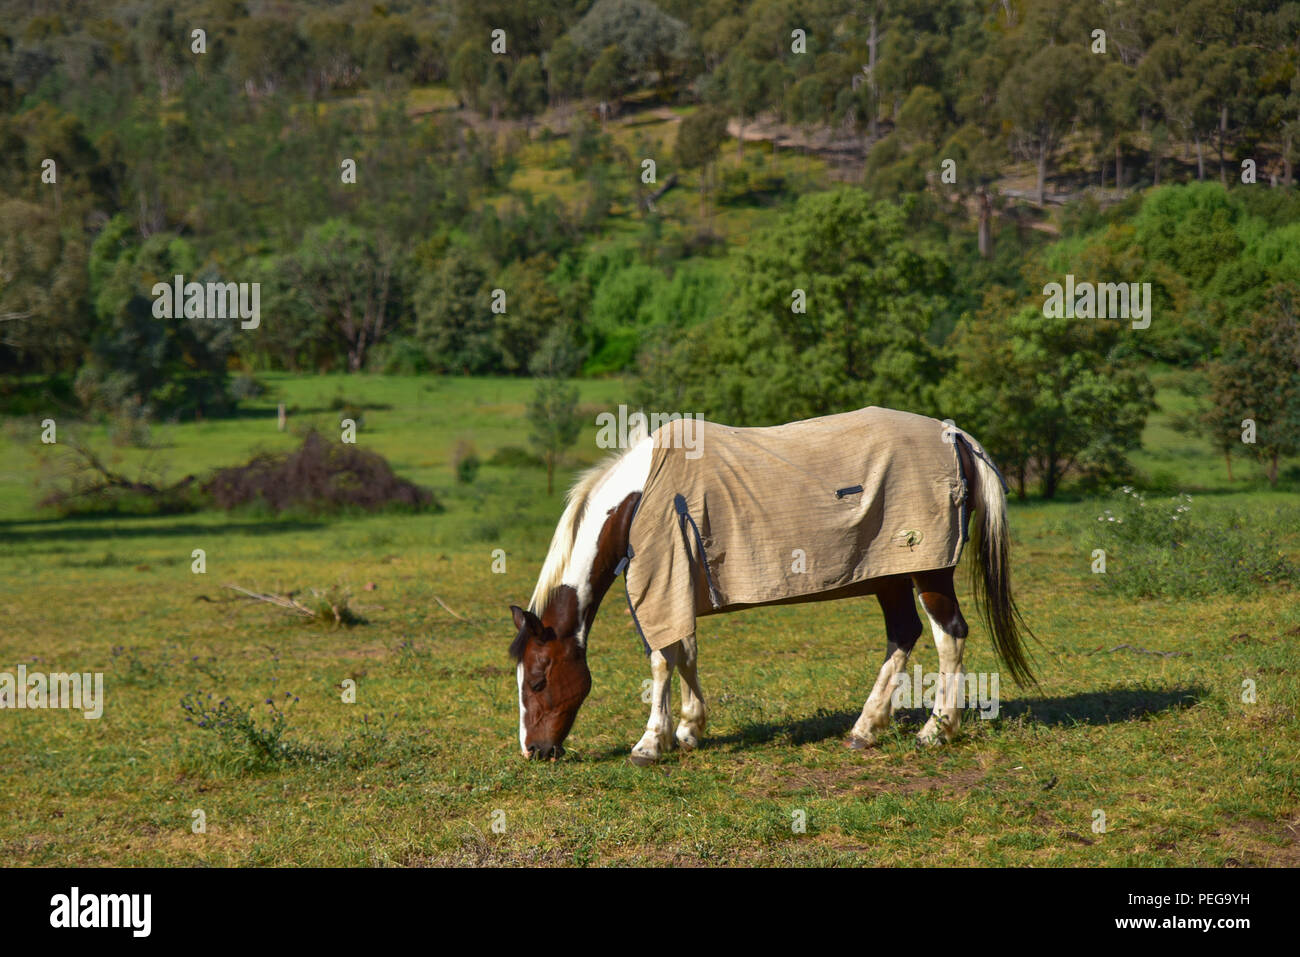 Horse eating grass in a farm Stock Photo